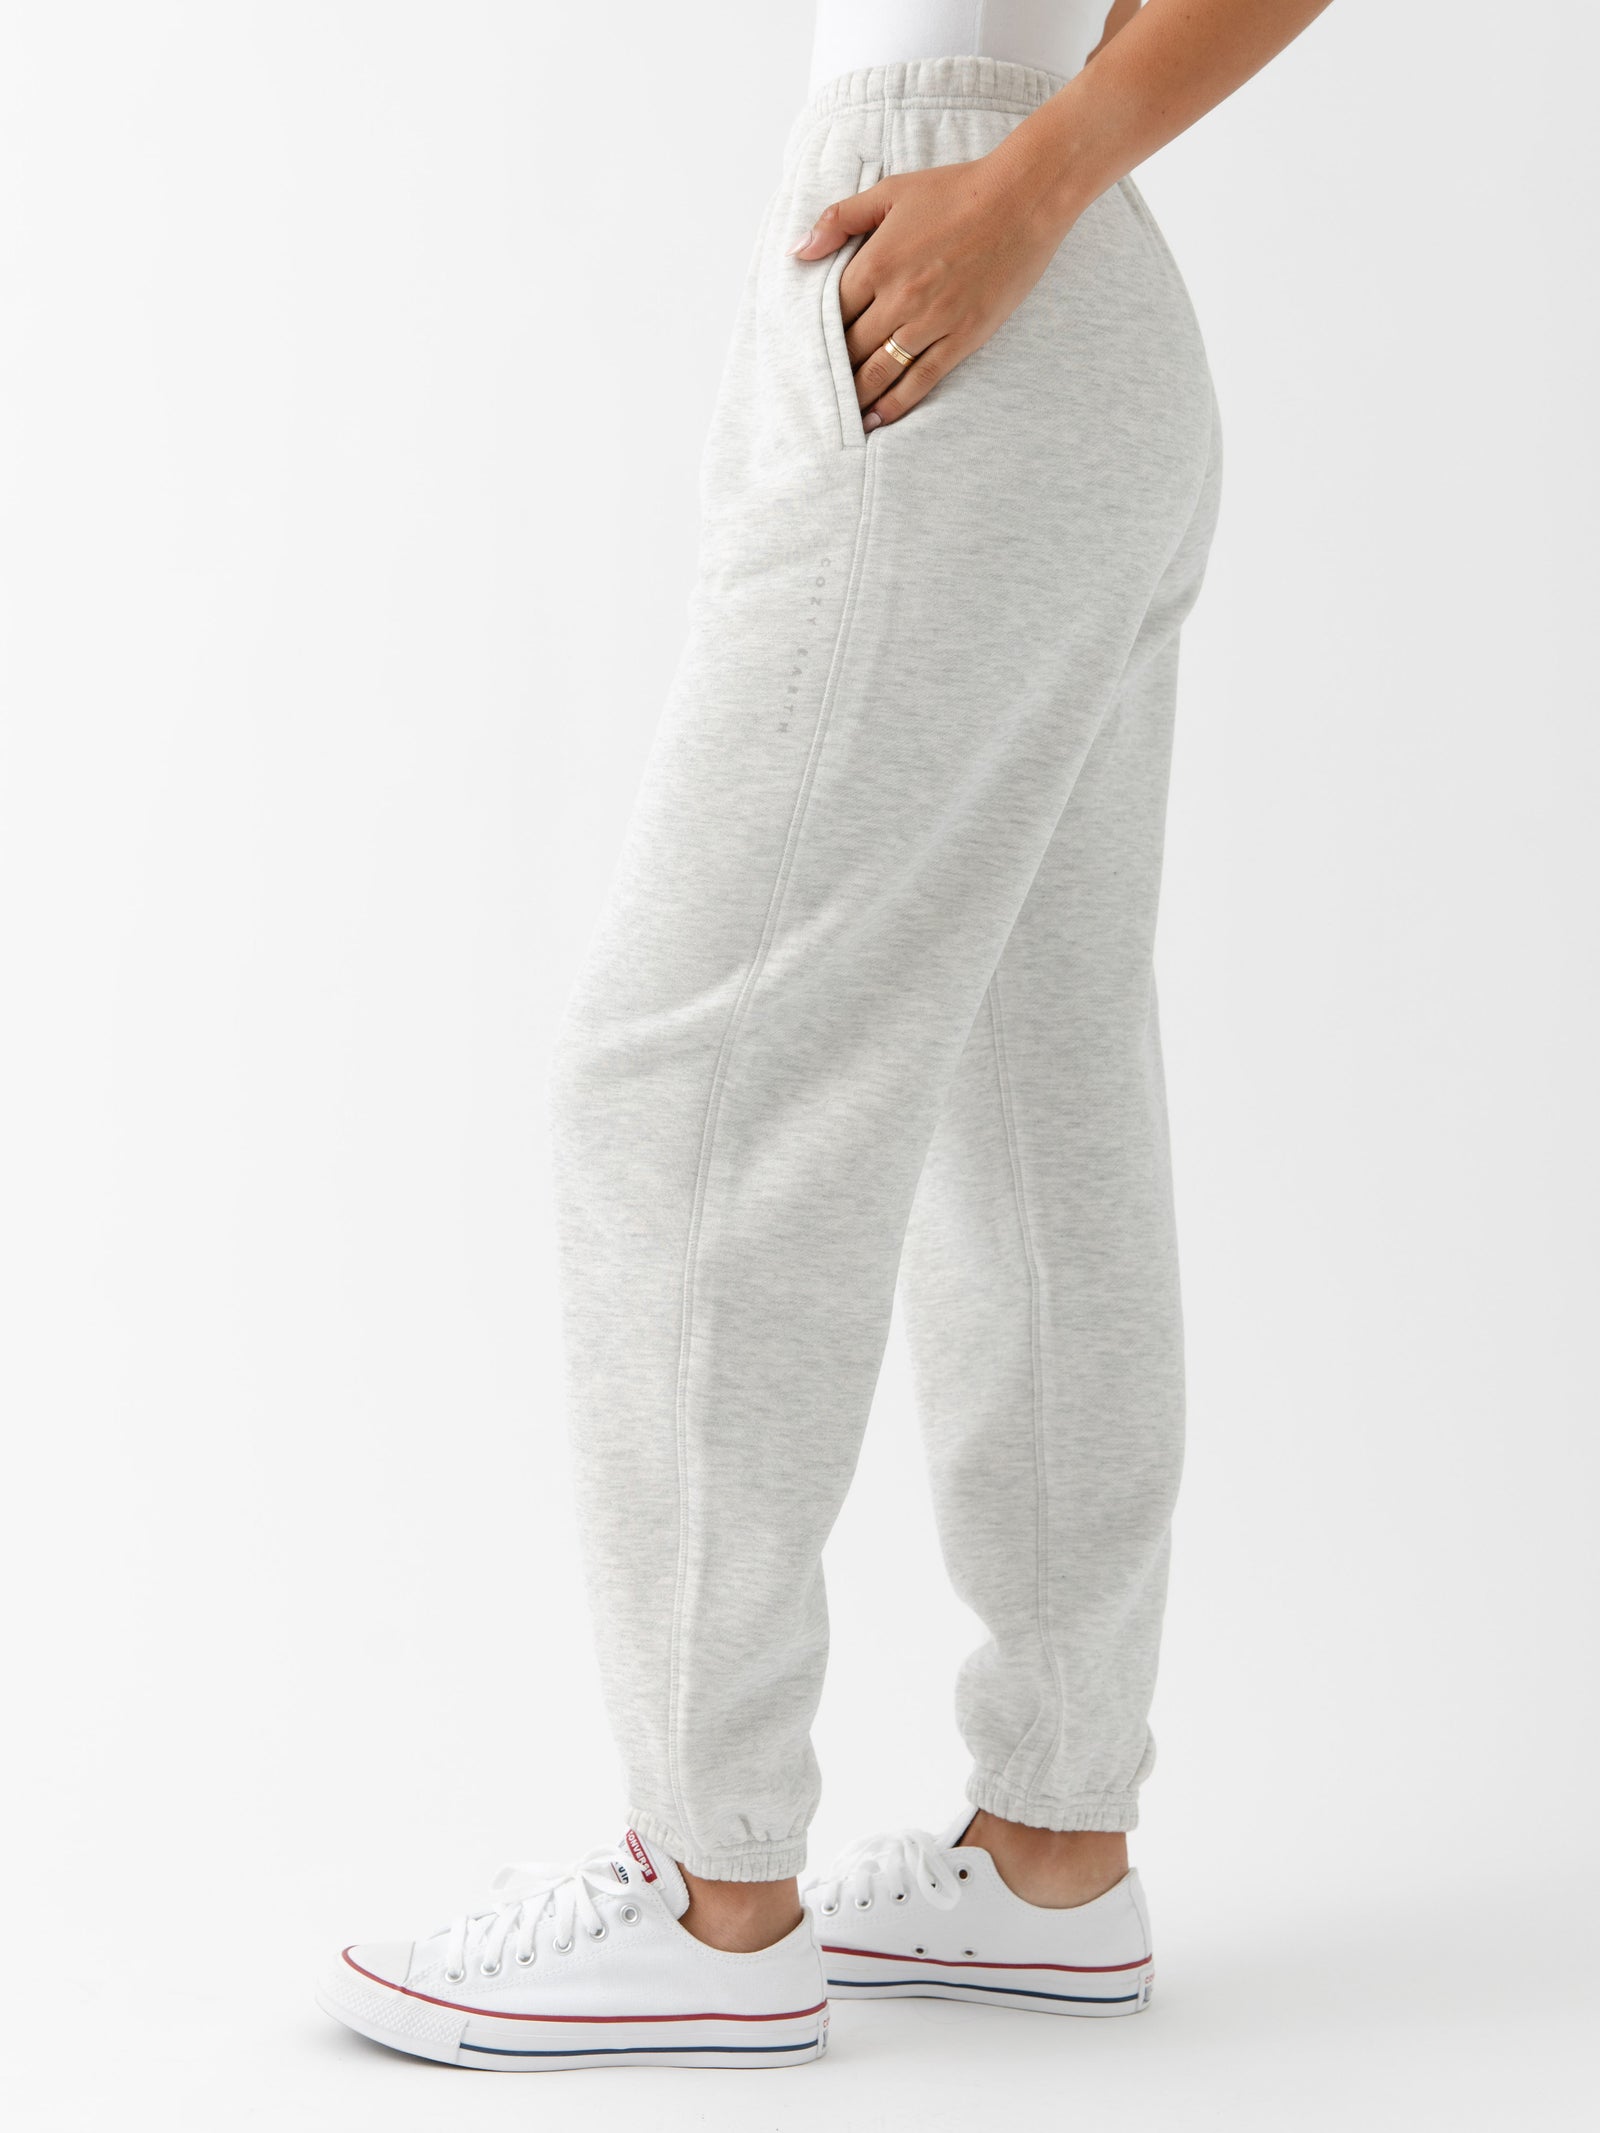 Heather Grey CityScape Joggers. The Joggers are being worn by a female model. The photo is taken from the waist down with the models hand in the pocket of the joggers. The back ground is white. 